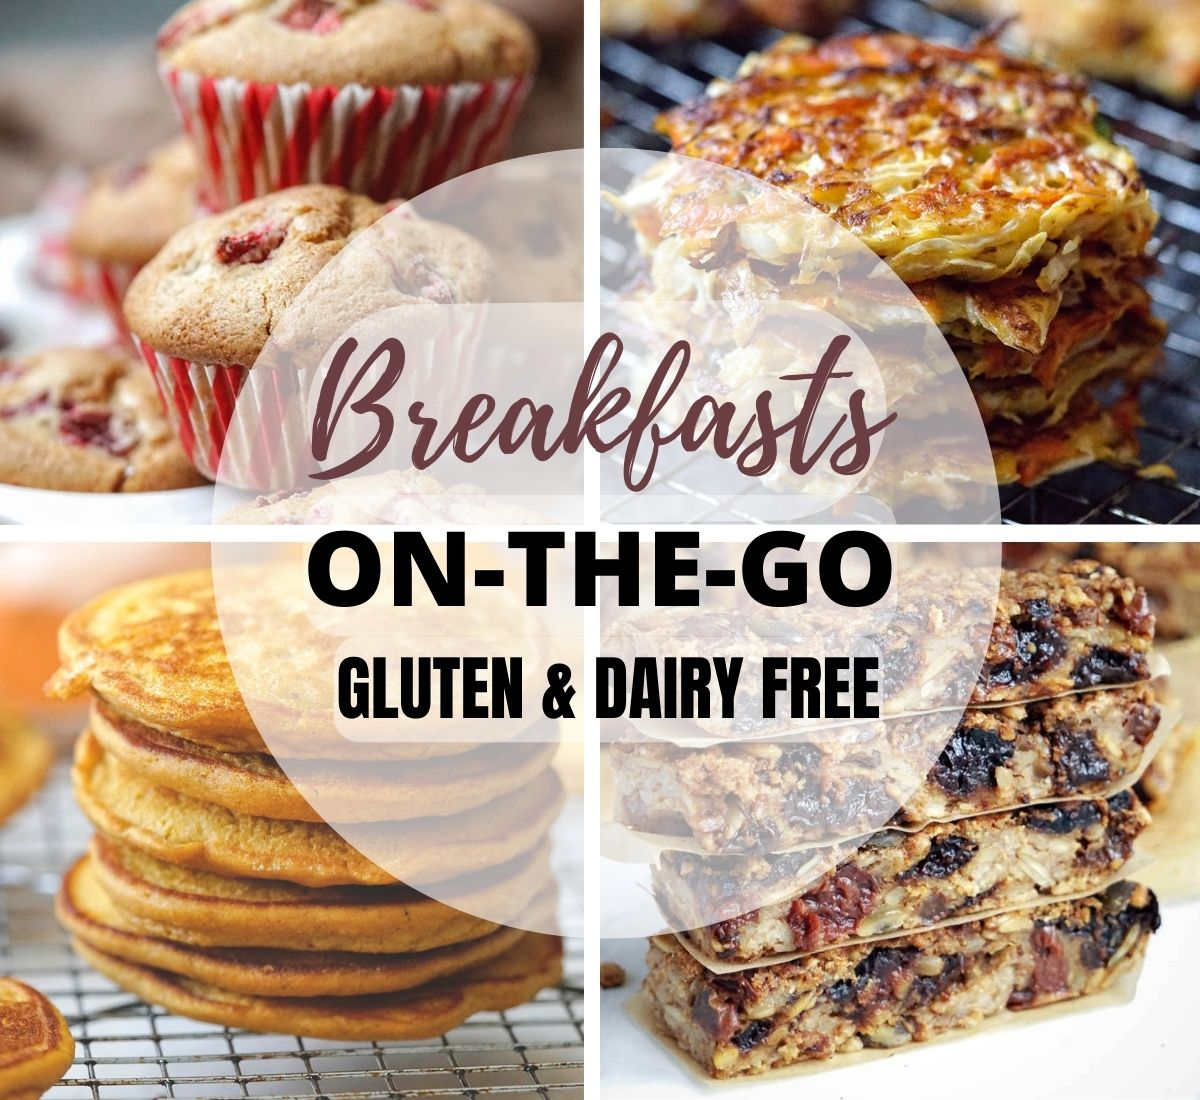 Gluten free dairy free breakfast on the go ideas, from sweet to savory recipes, these healthy breakfast ideas can be made ahead and packed to be taken with you.